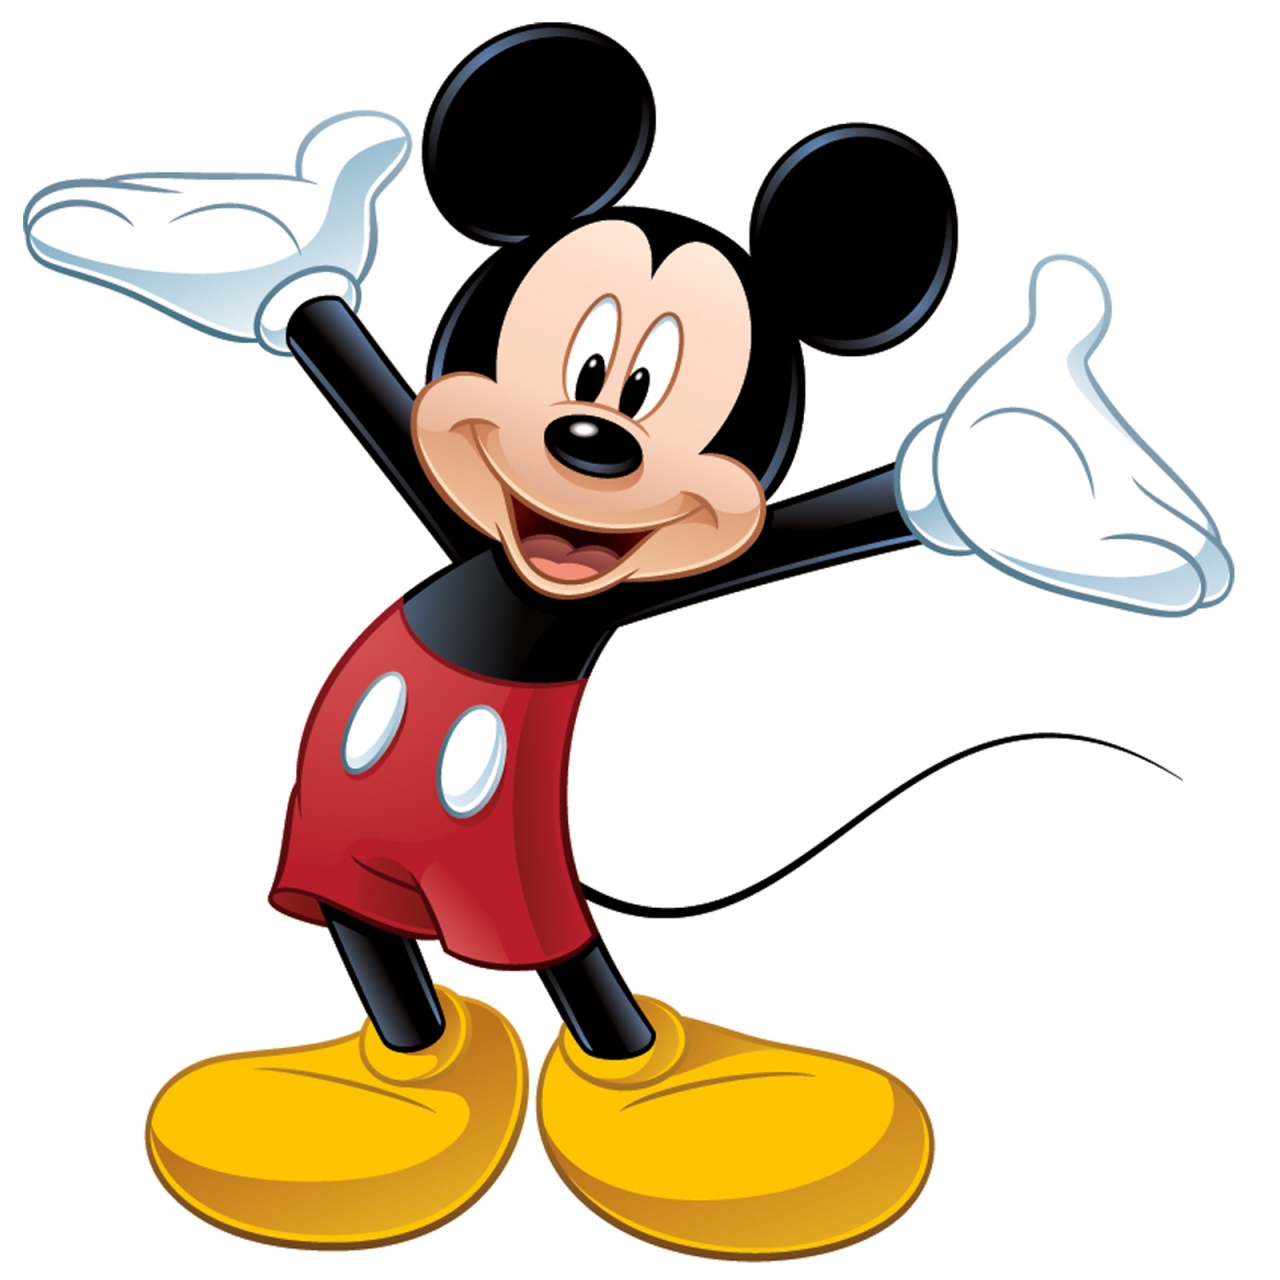 Mickey mouse cartoon images free download clip art jpg